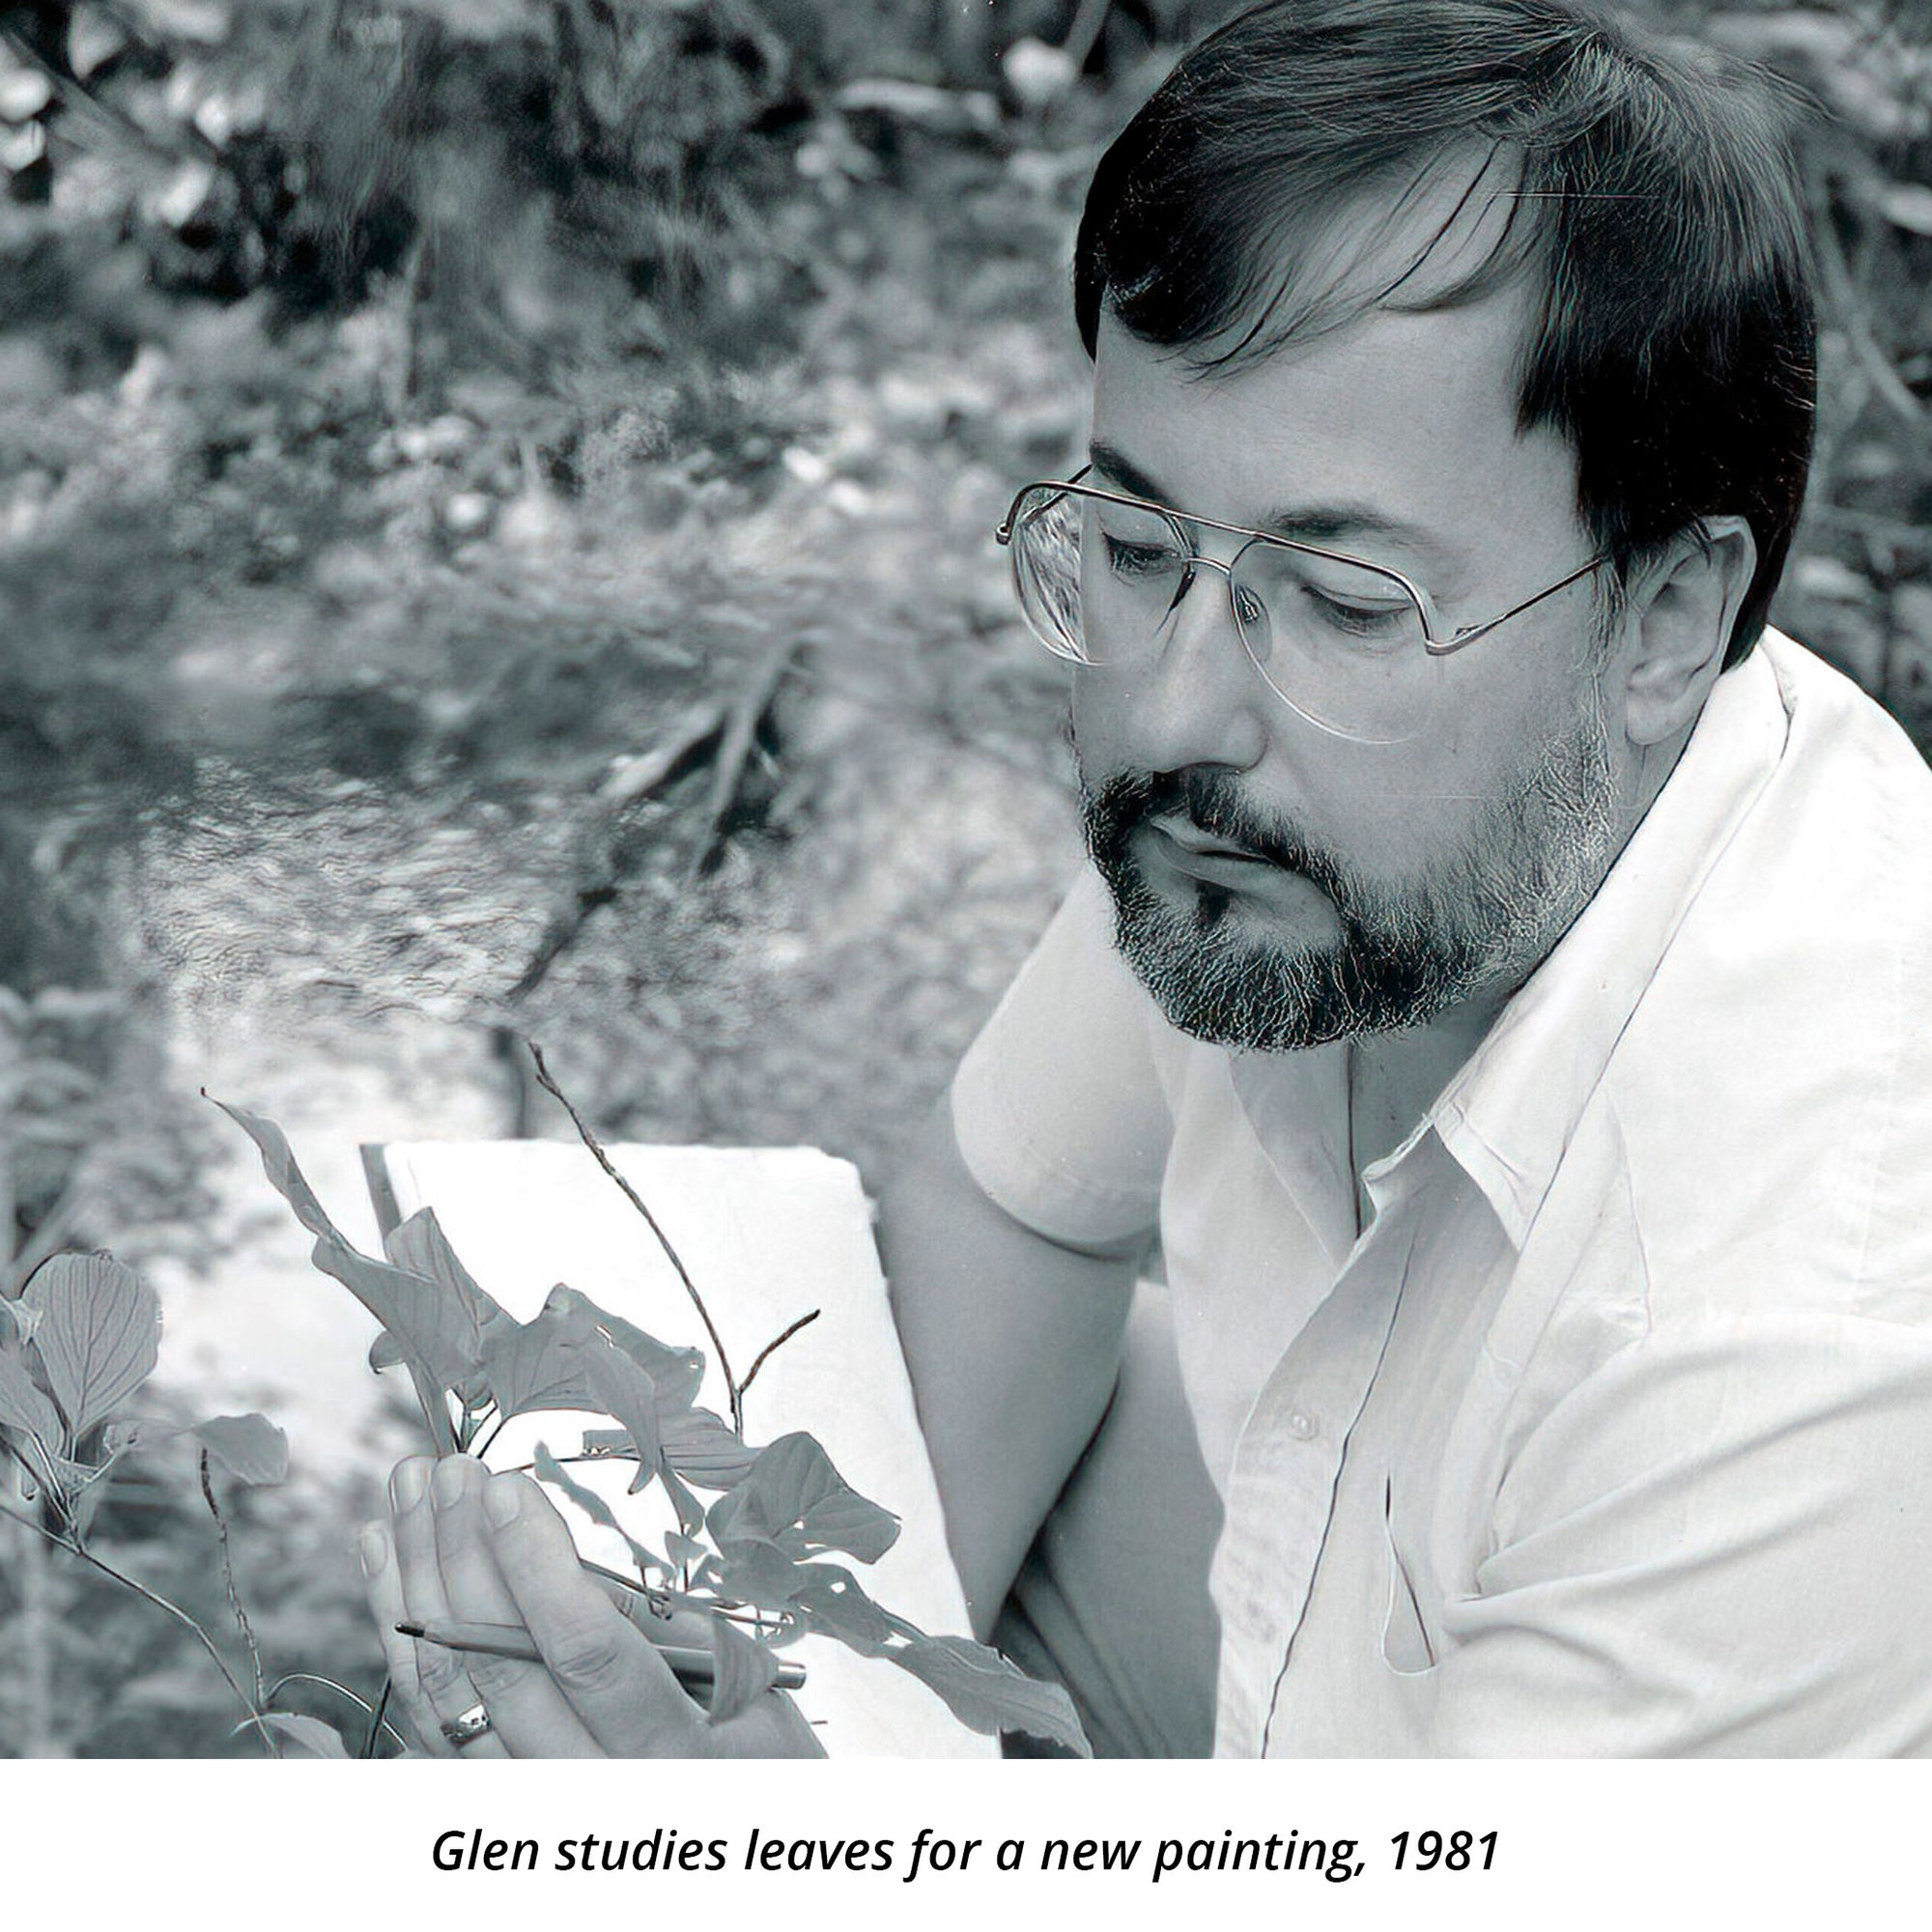 Glen Loates studies leaves for a new painting, 1981